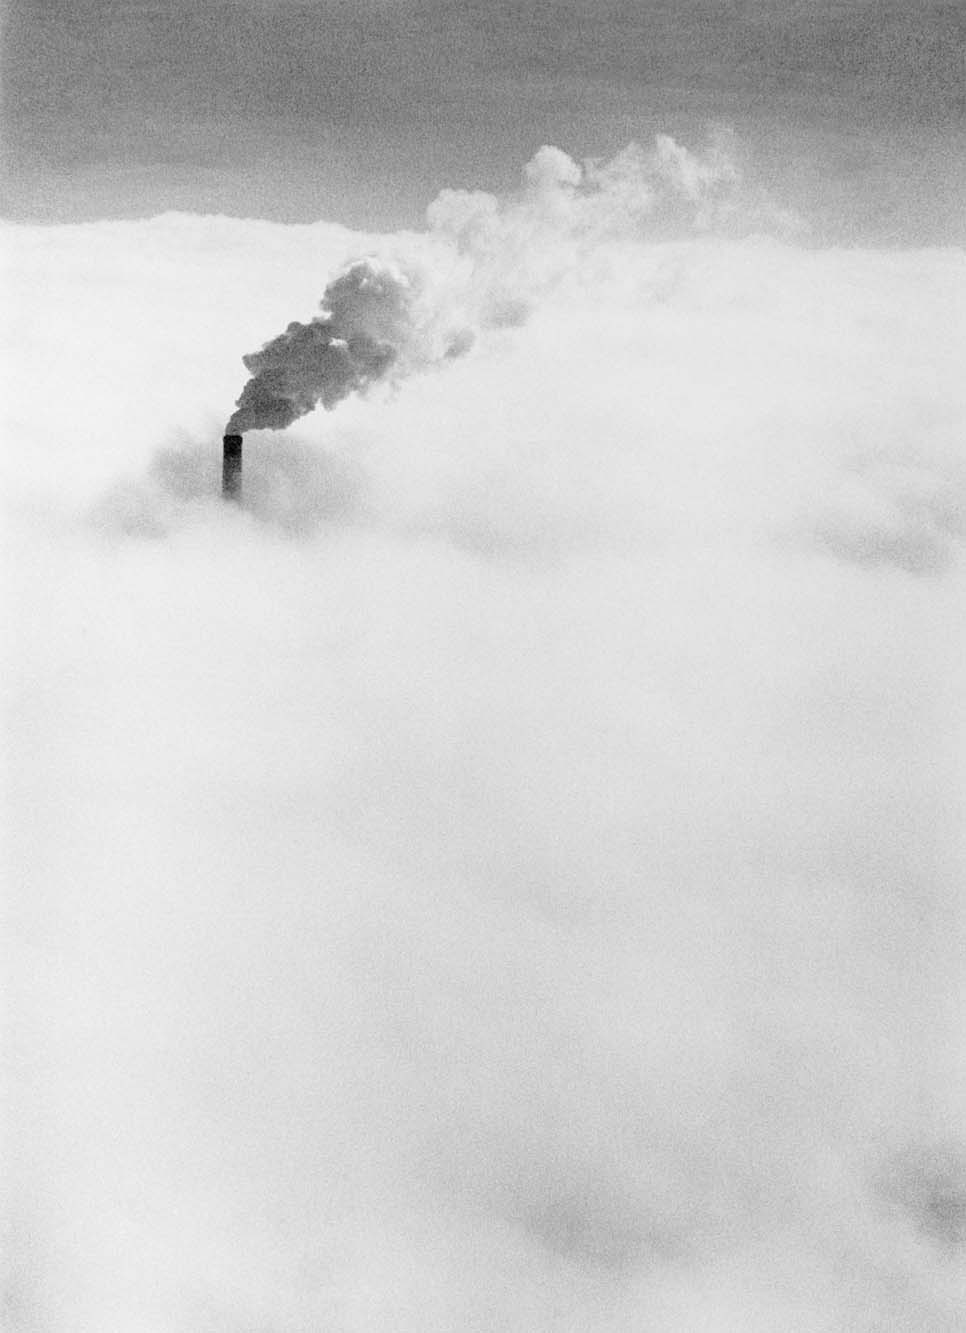 Smokestack in Clouds